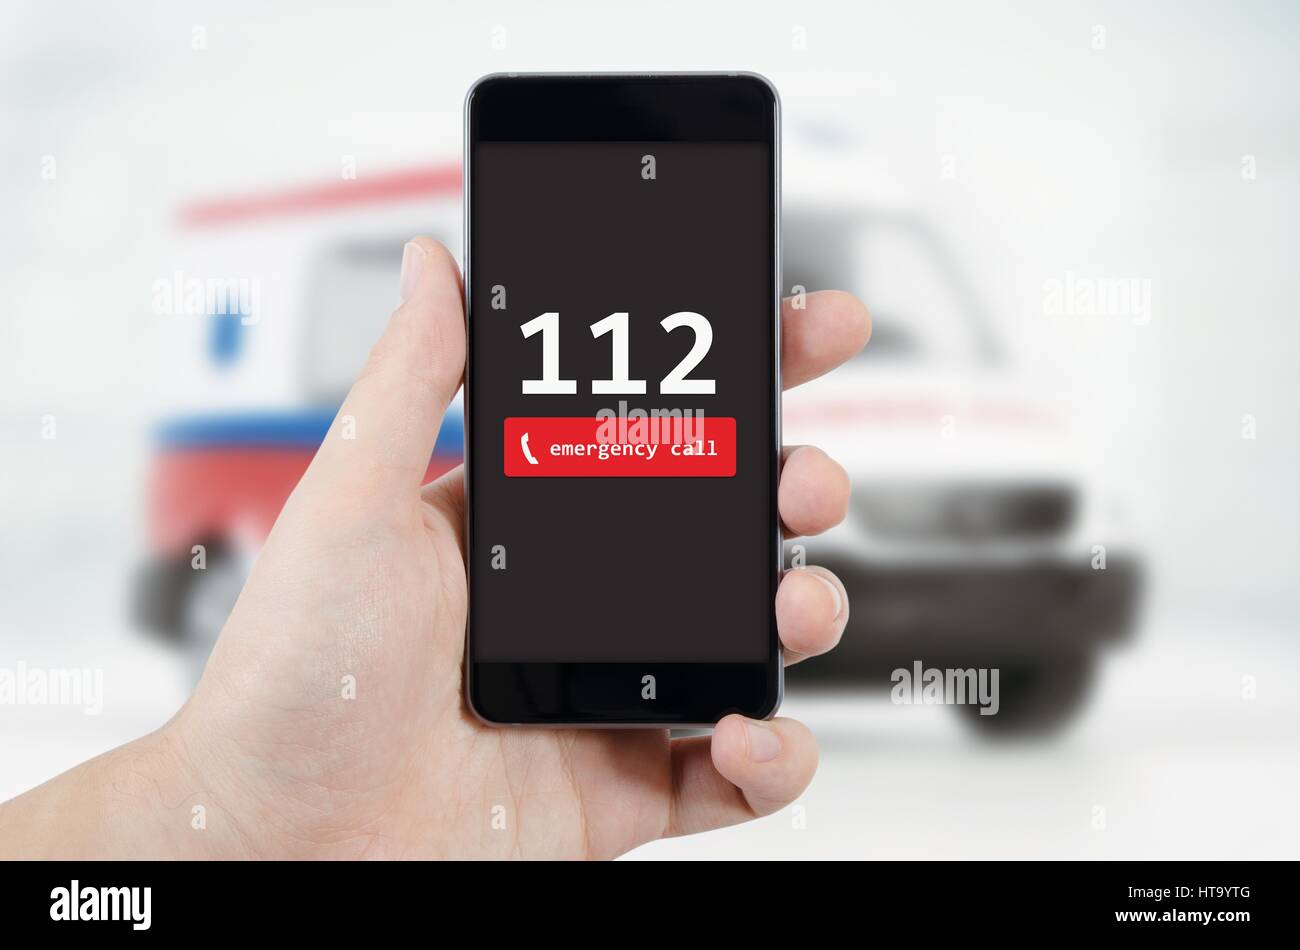 Man calling emergency. Ambulance in background. emergency call 112 aid man concept Stock Photo